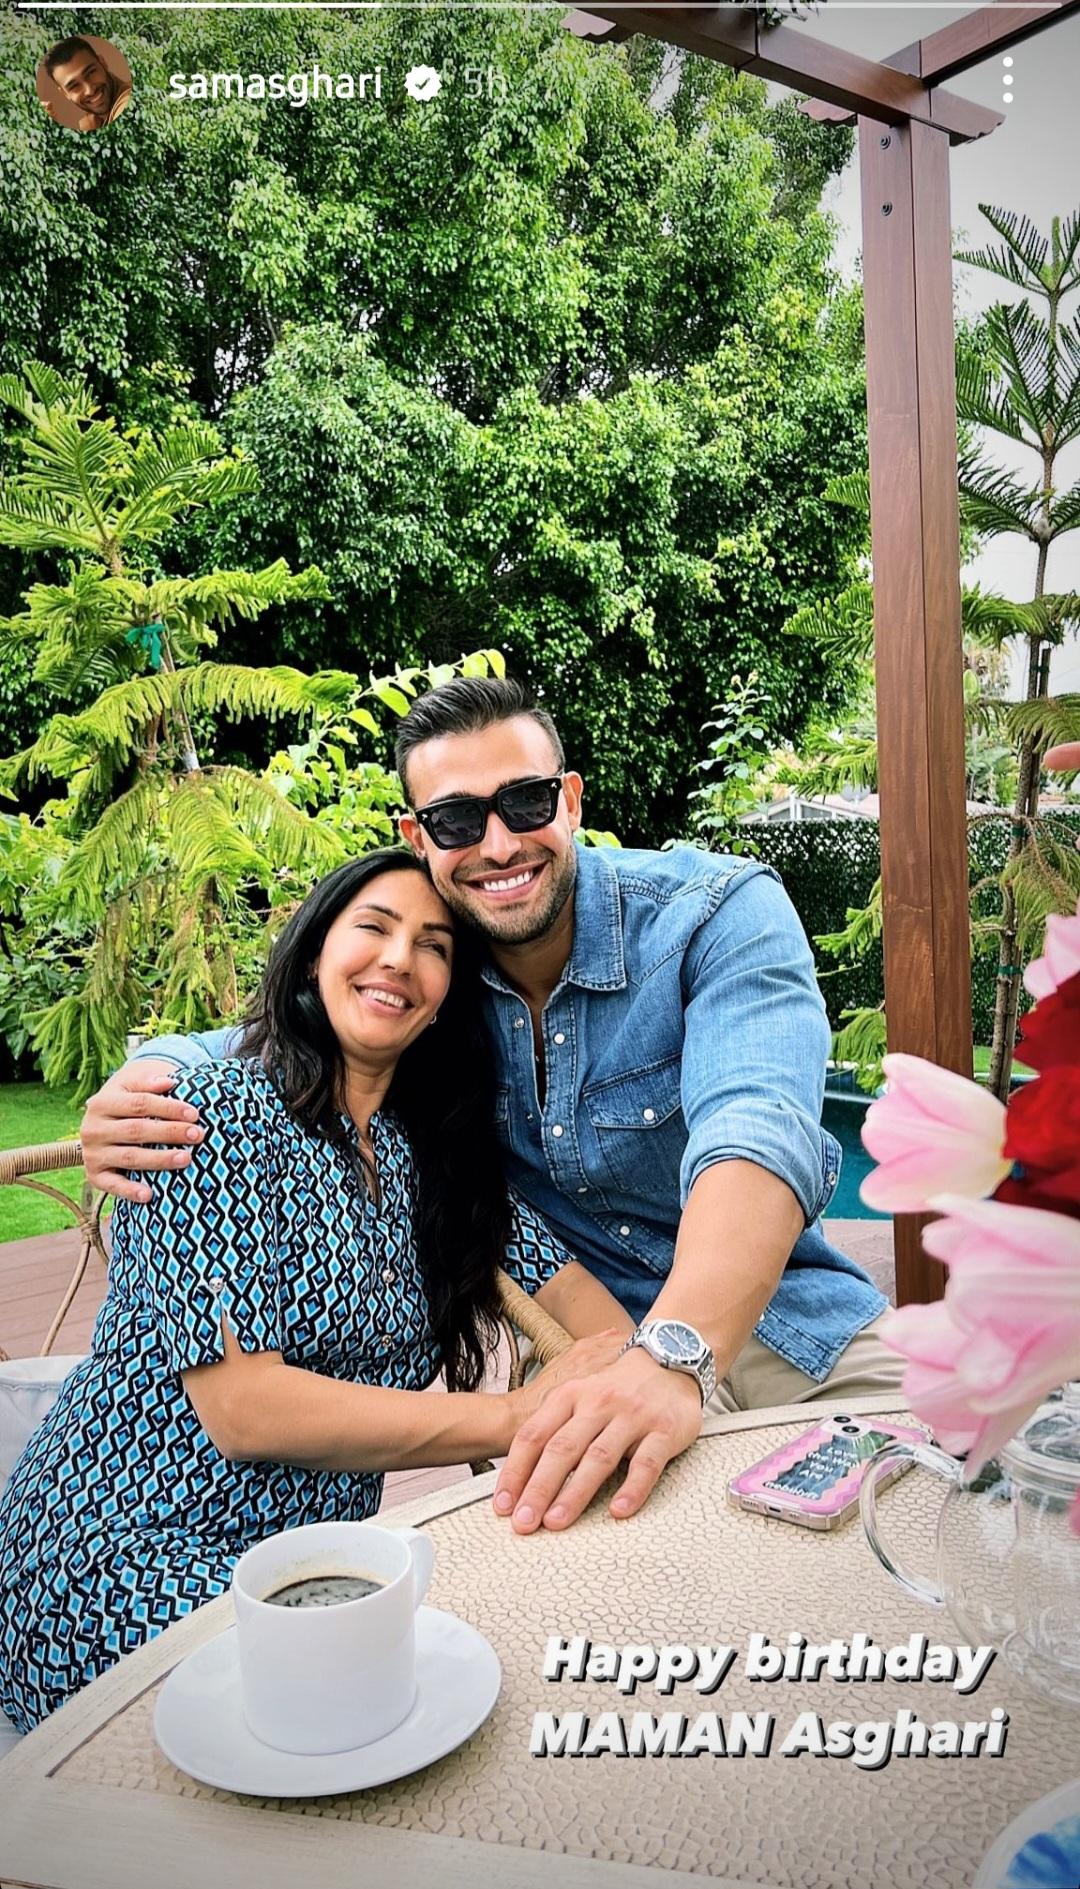 Sam Asghari Shares Sweet Snap To Celebrate His Mother's Birthday